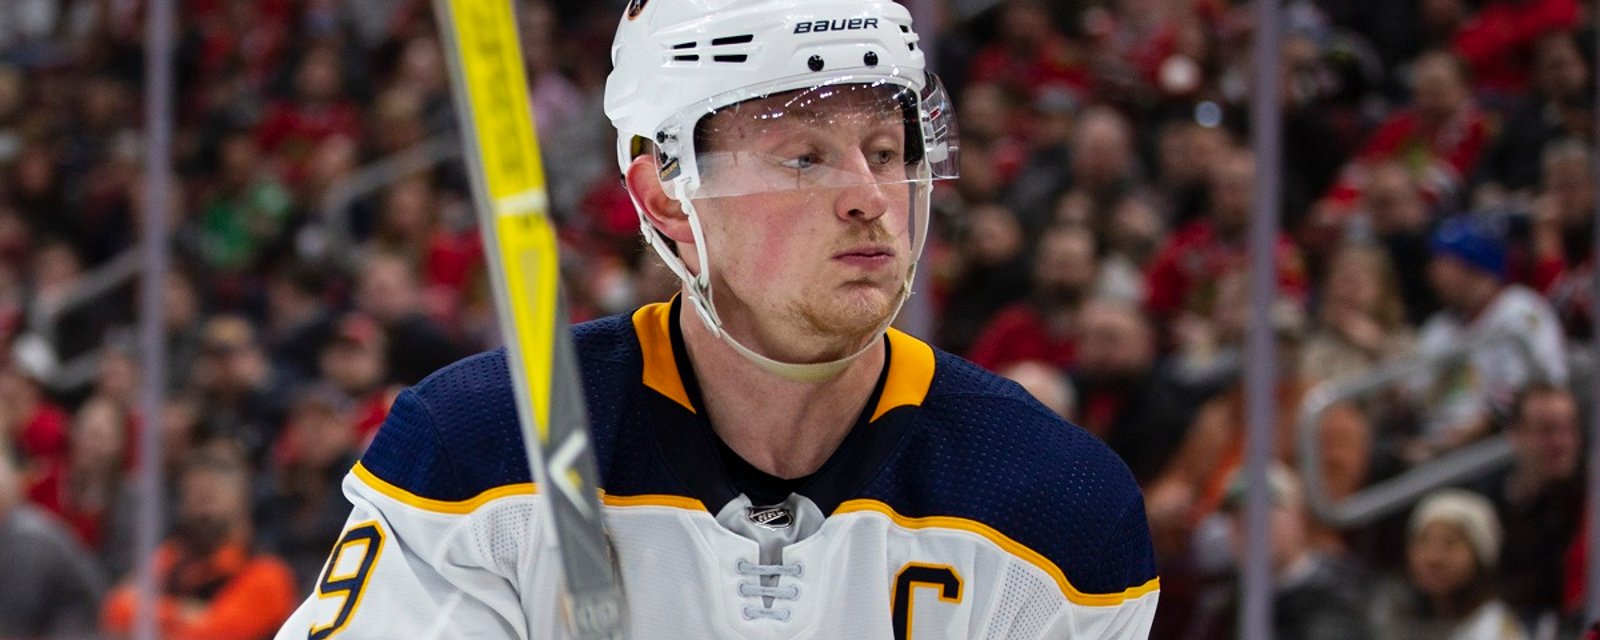 Jack Eichel drops another bombshell during his exit interview.